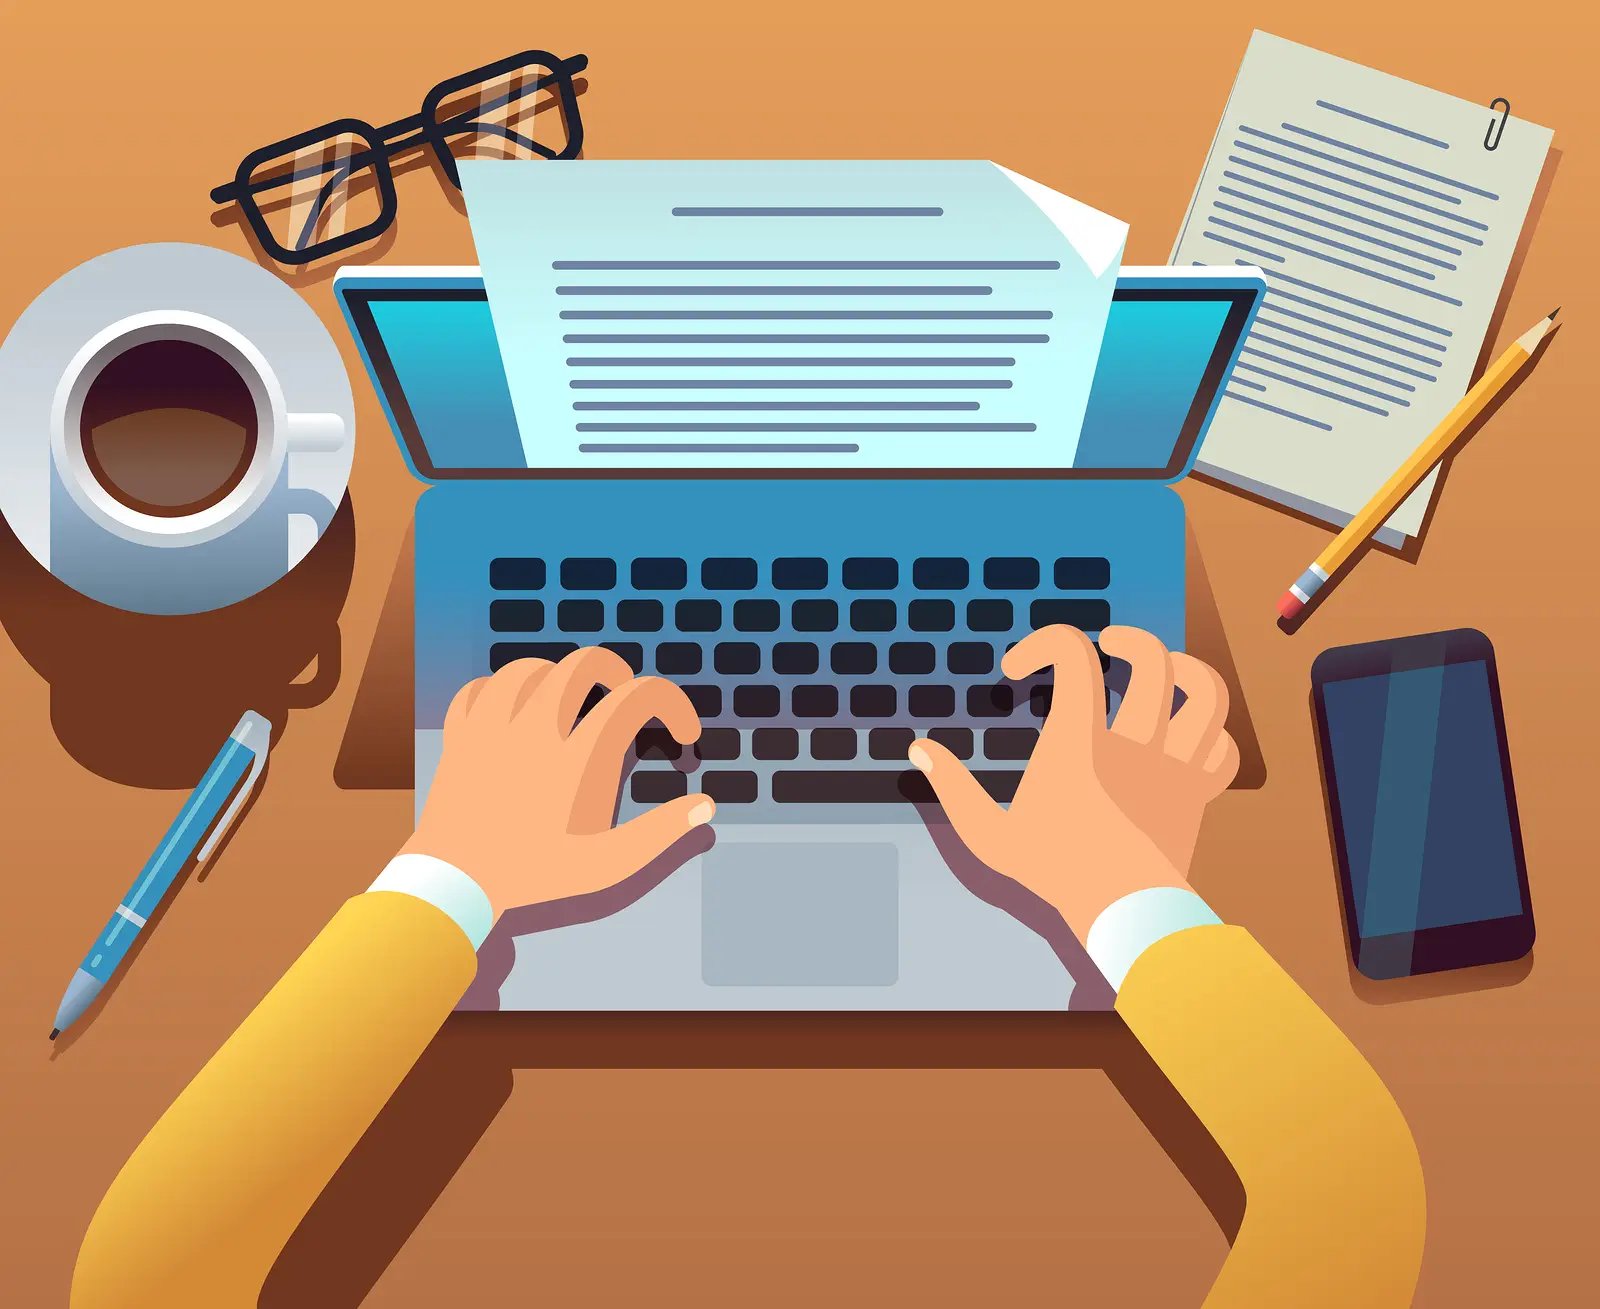 Illustration of someone typing on a computer with a coffee glasses and a smartphone on the table nearby